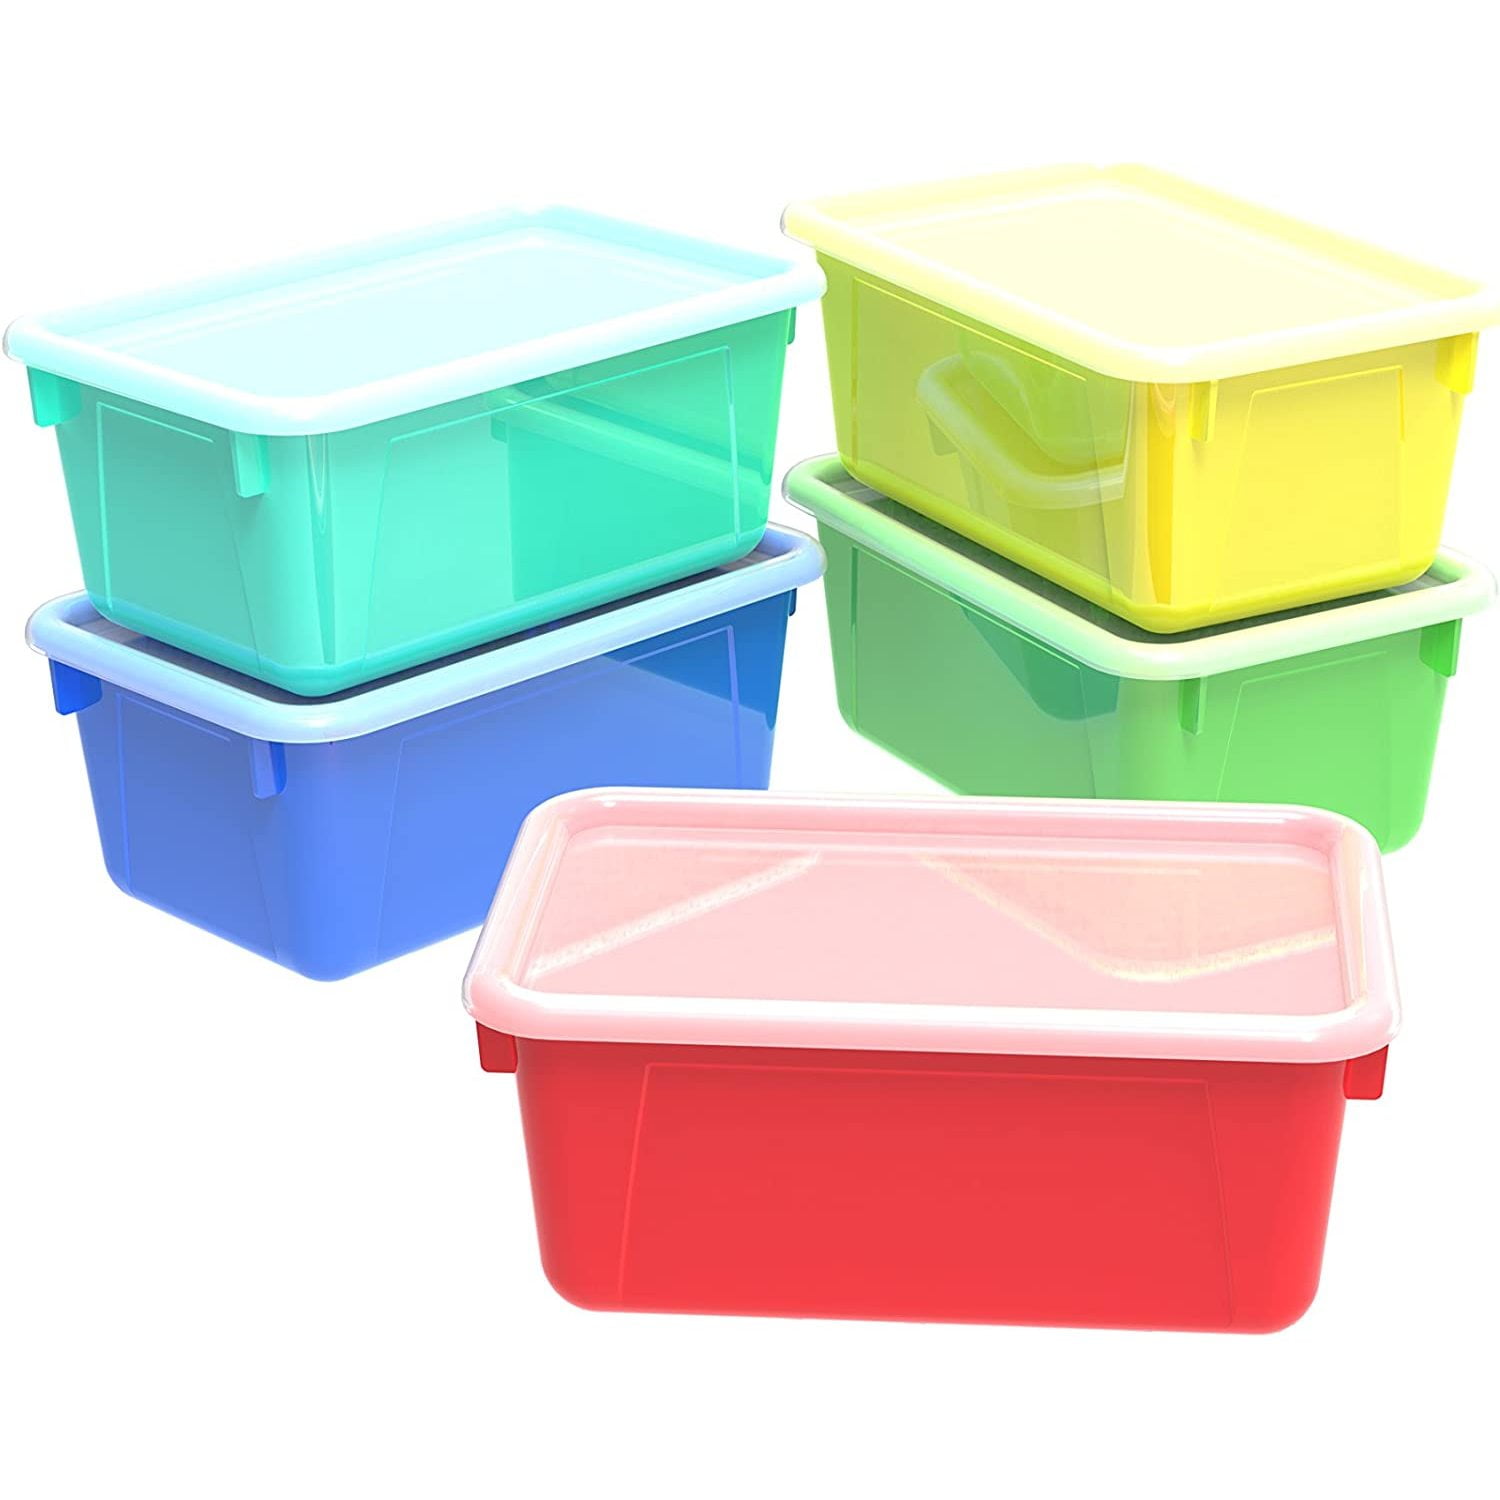 Nicunom 6 Pack Small Cubby Bins Storage Bins with Lids, 5 Qt Plastic  Storage Bins Colorful Toy Storage Containers, Stackable Organizer Cubbies  for